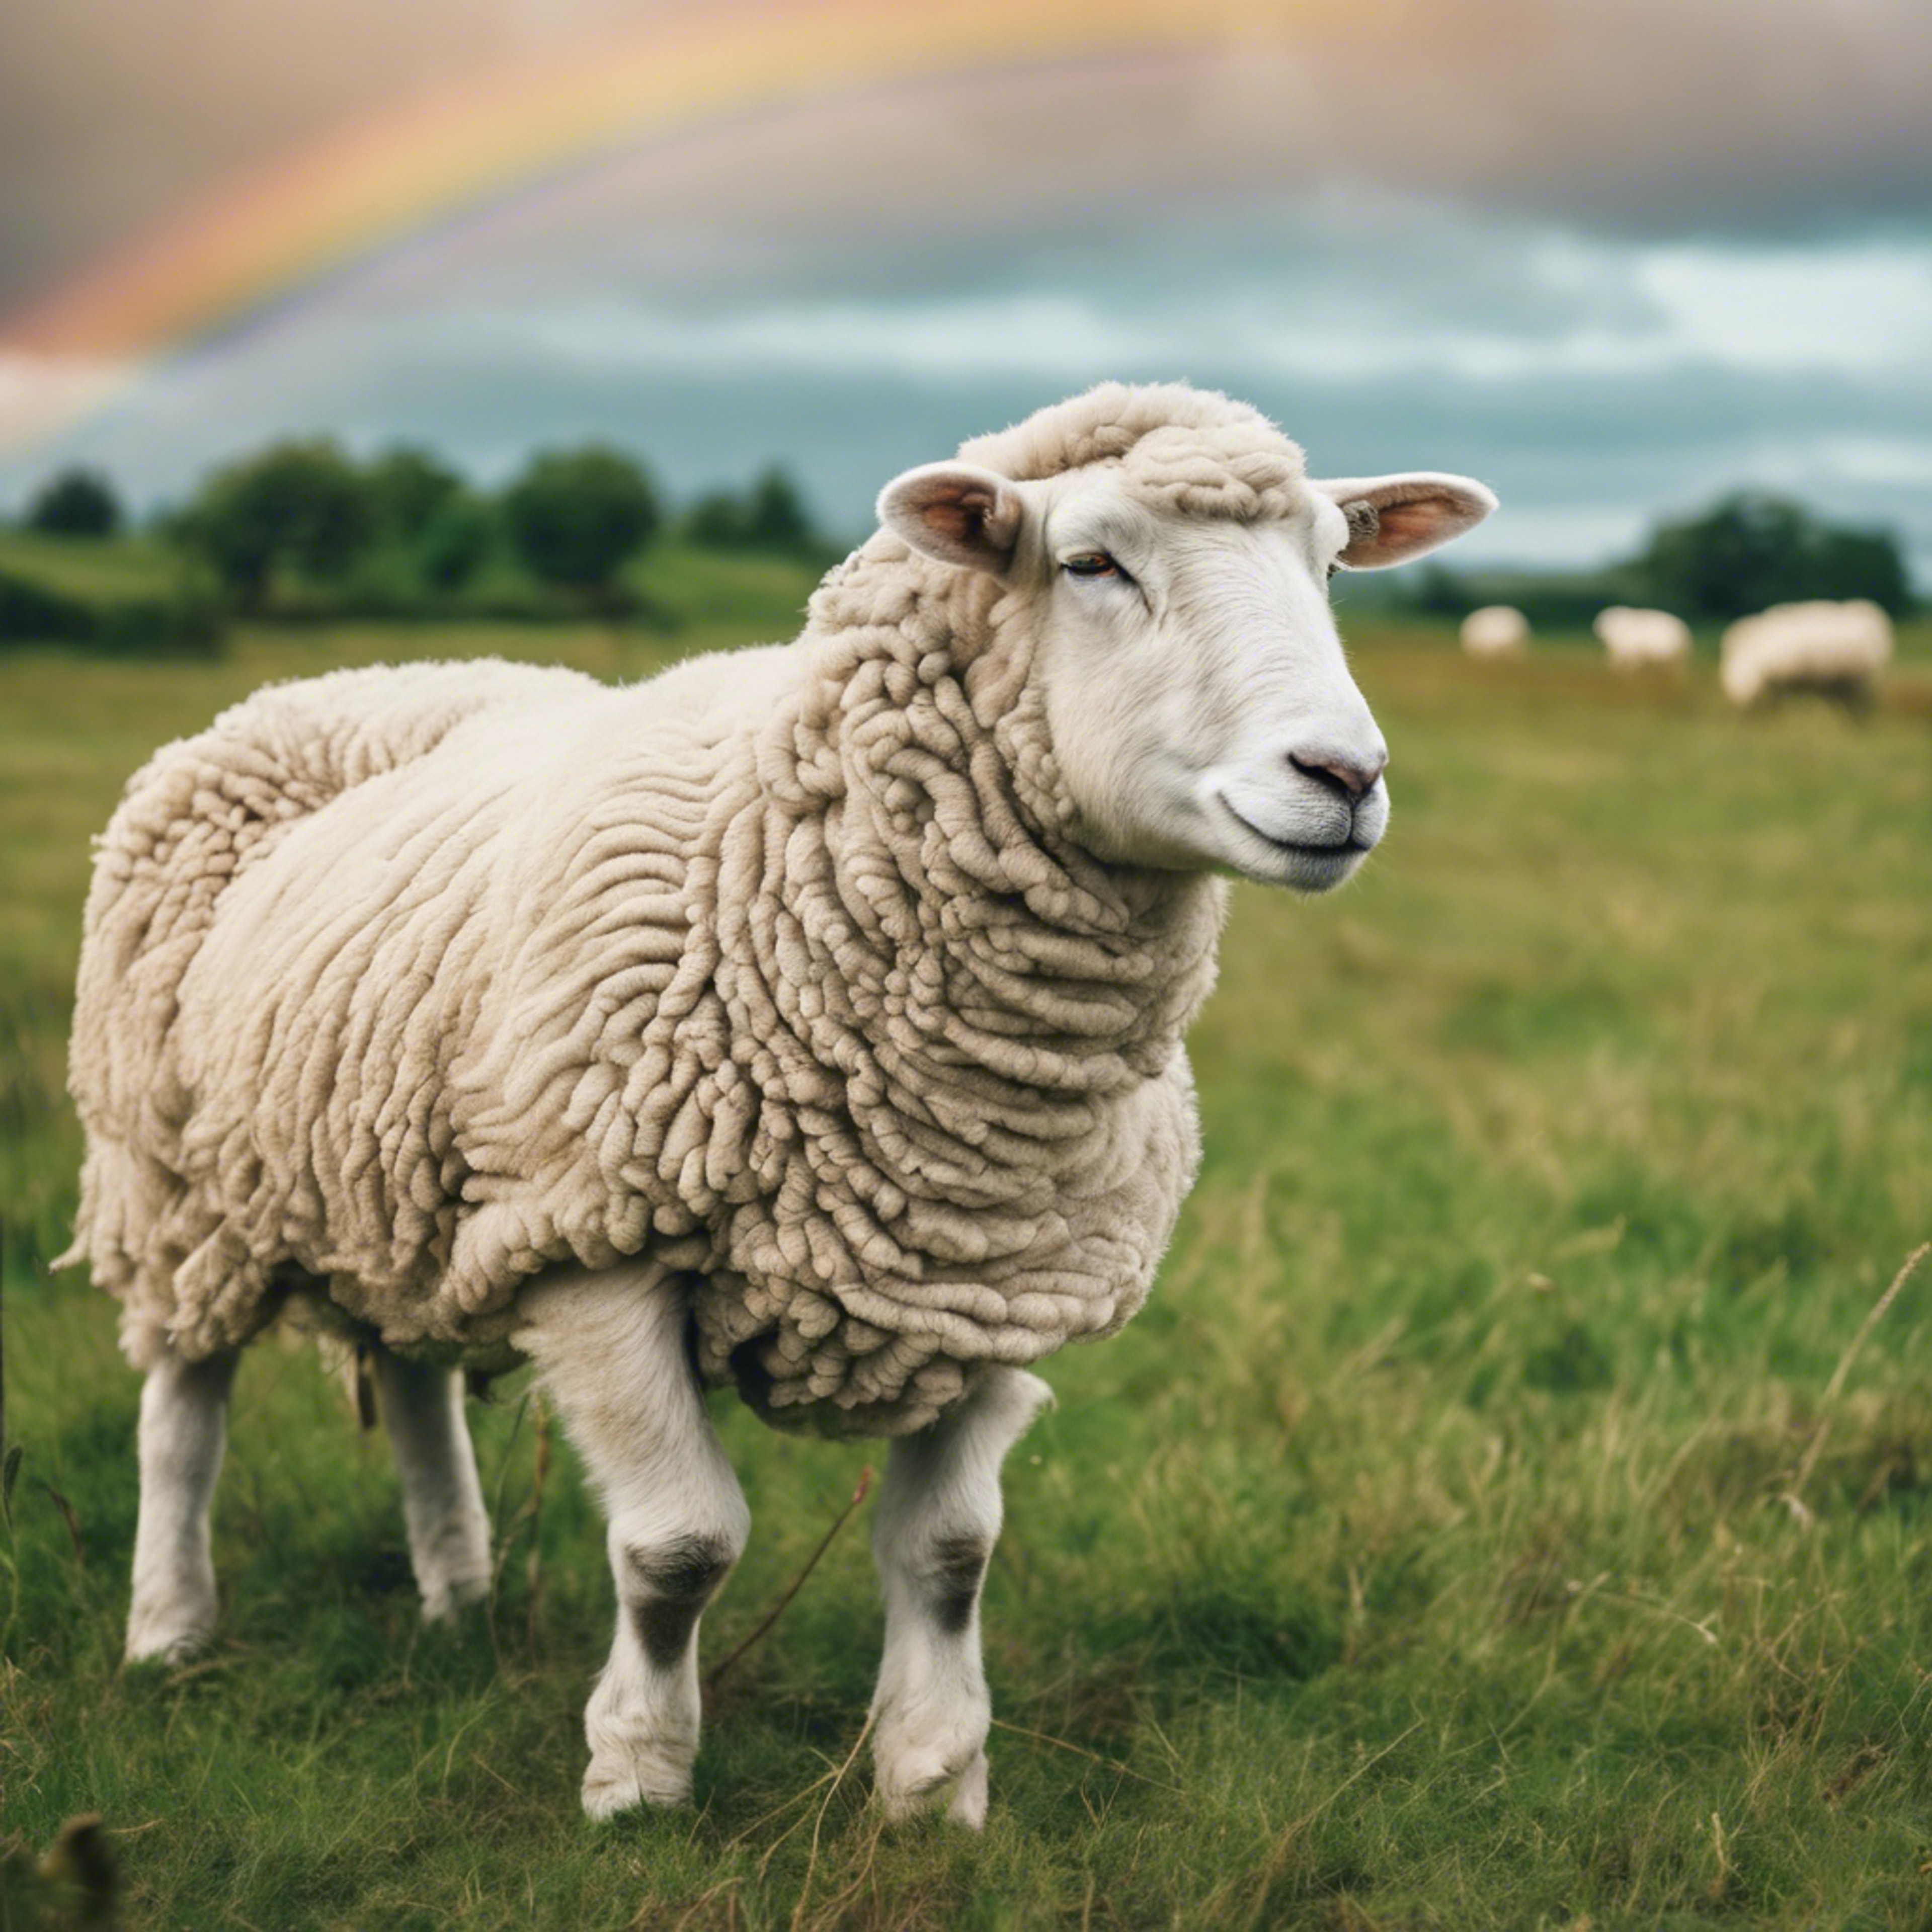 A beautiful open field of grass with puffy white cloud sheep that create rainbow trails as they bound joyfully around. Tapéta[bc005b864b354d3896db]